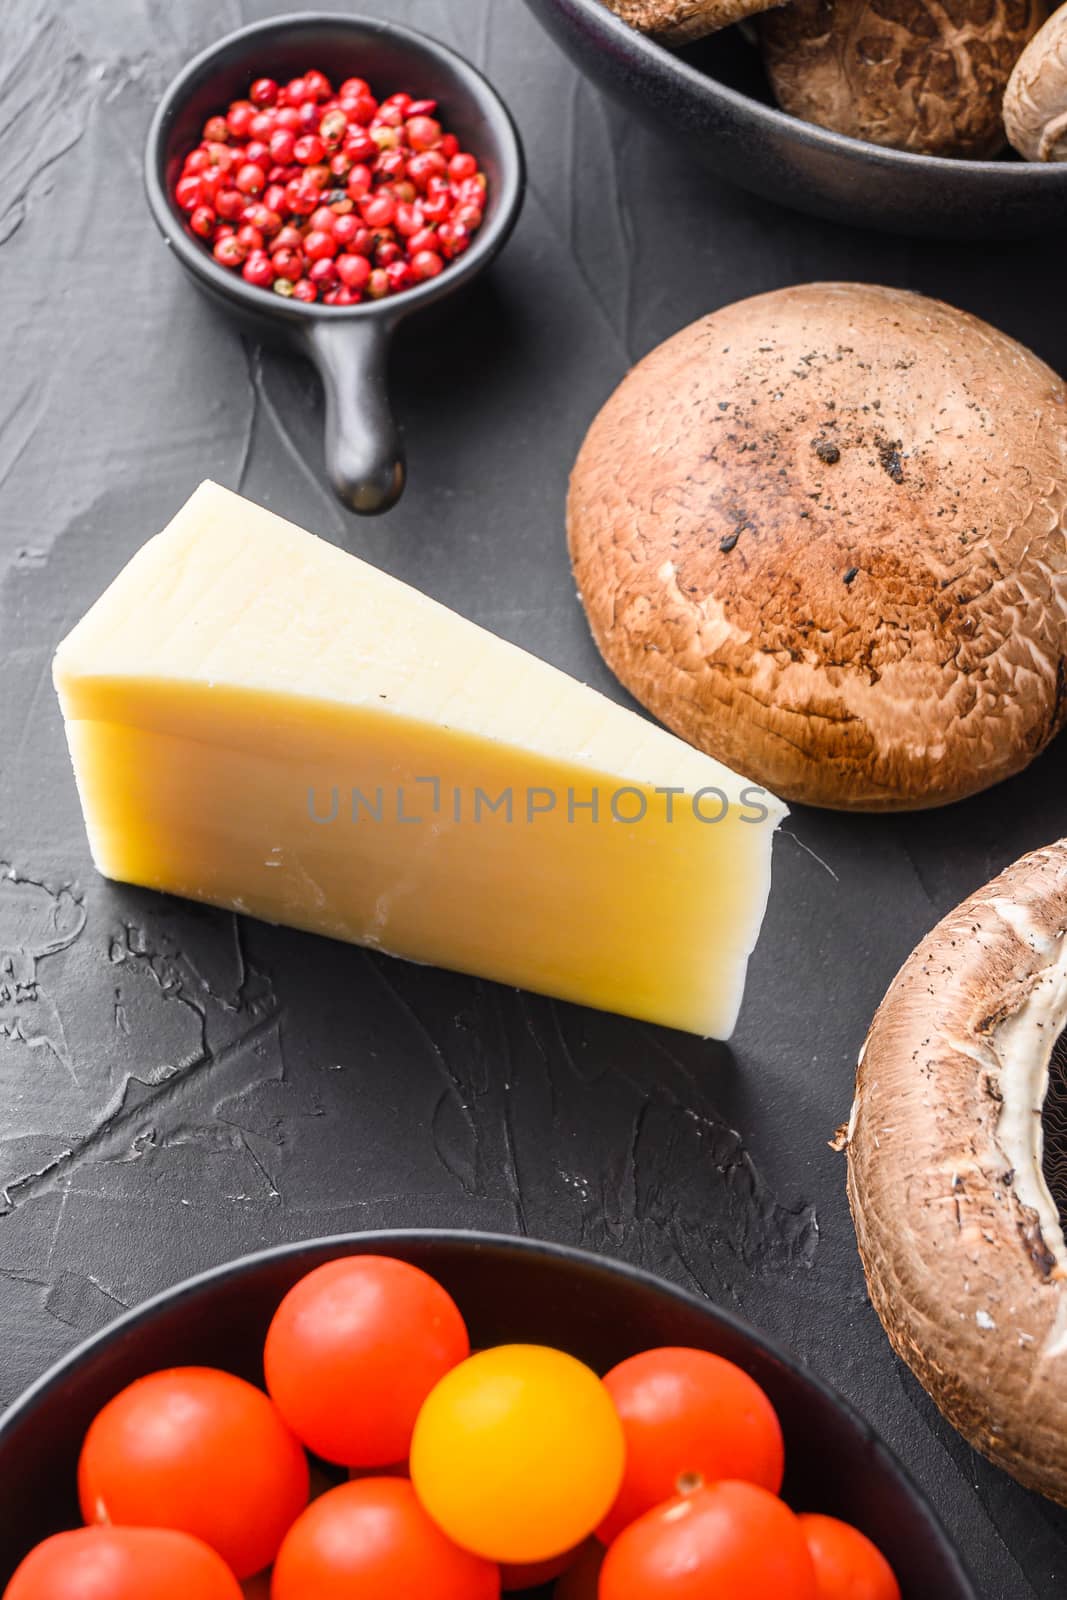 Cheddar cheese and portabello mushrooms ingredients for baking, and sage on black background.top view close up. by Ilianesolenyi